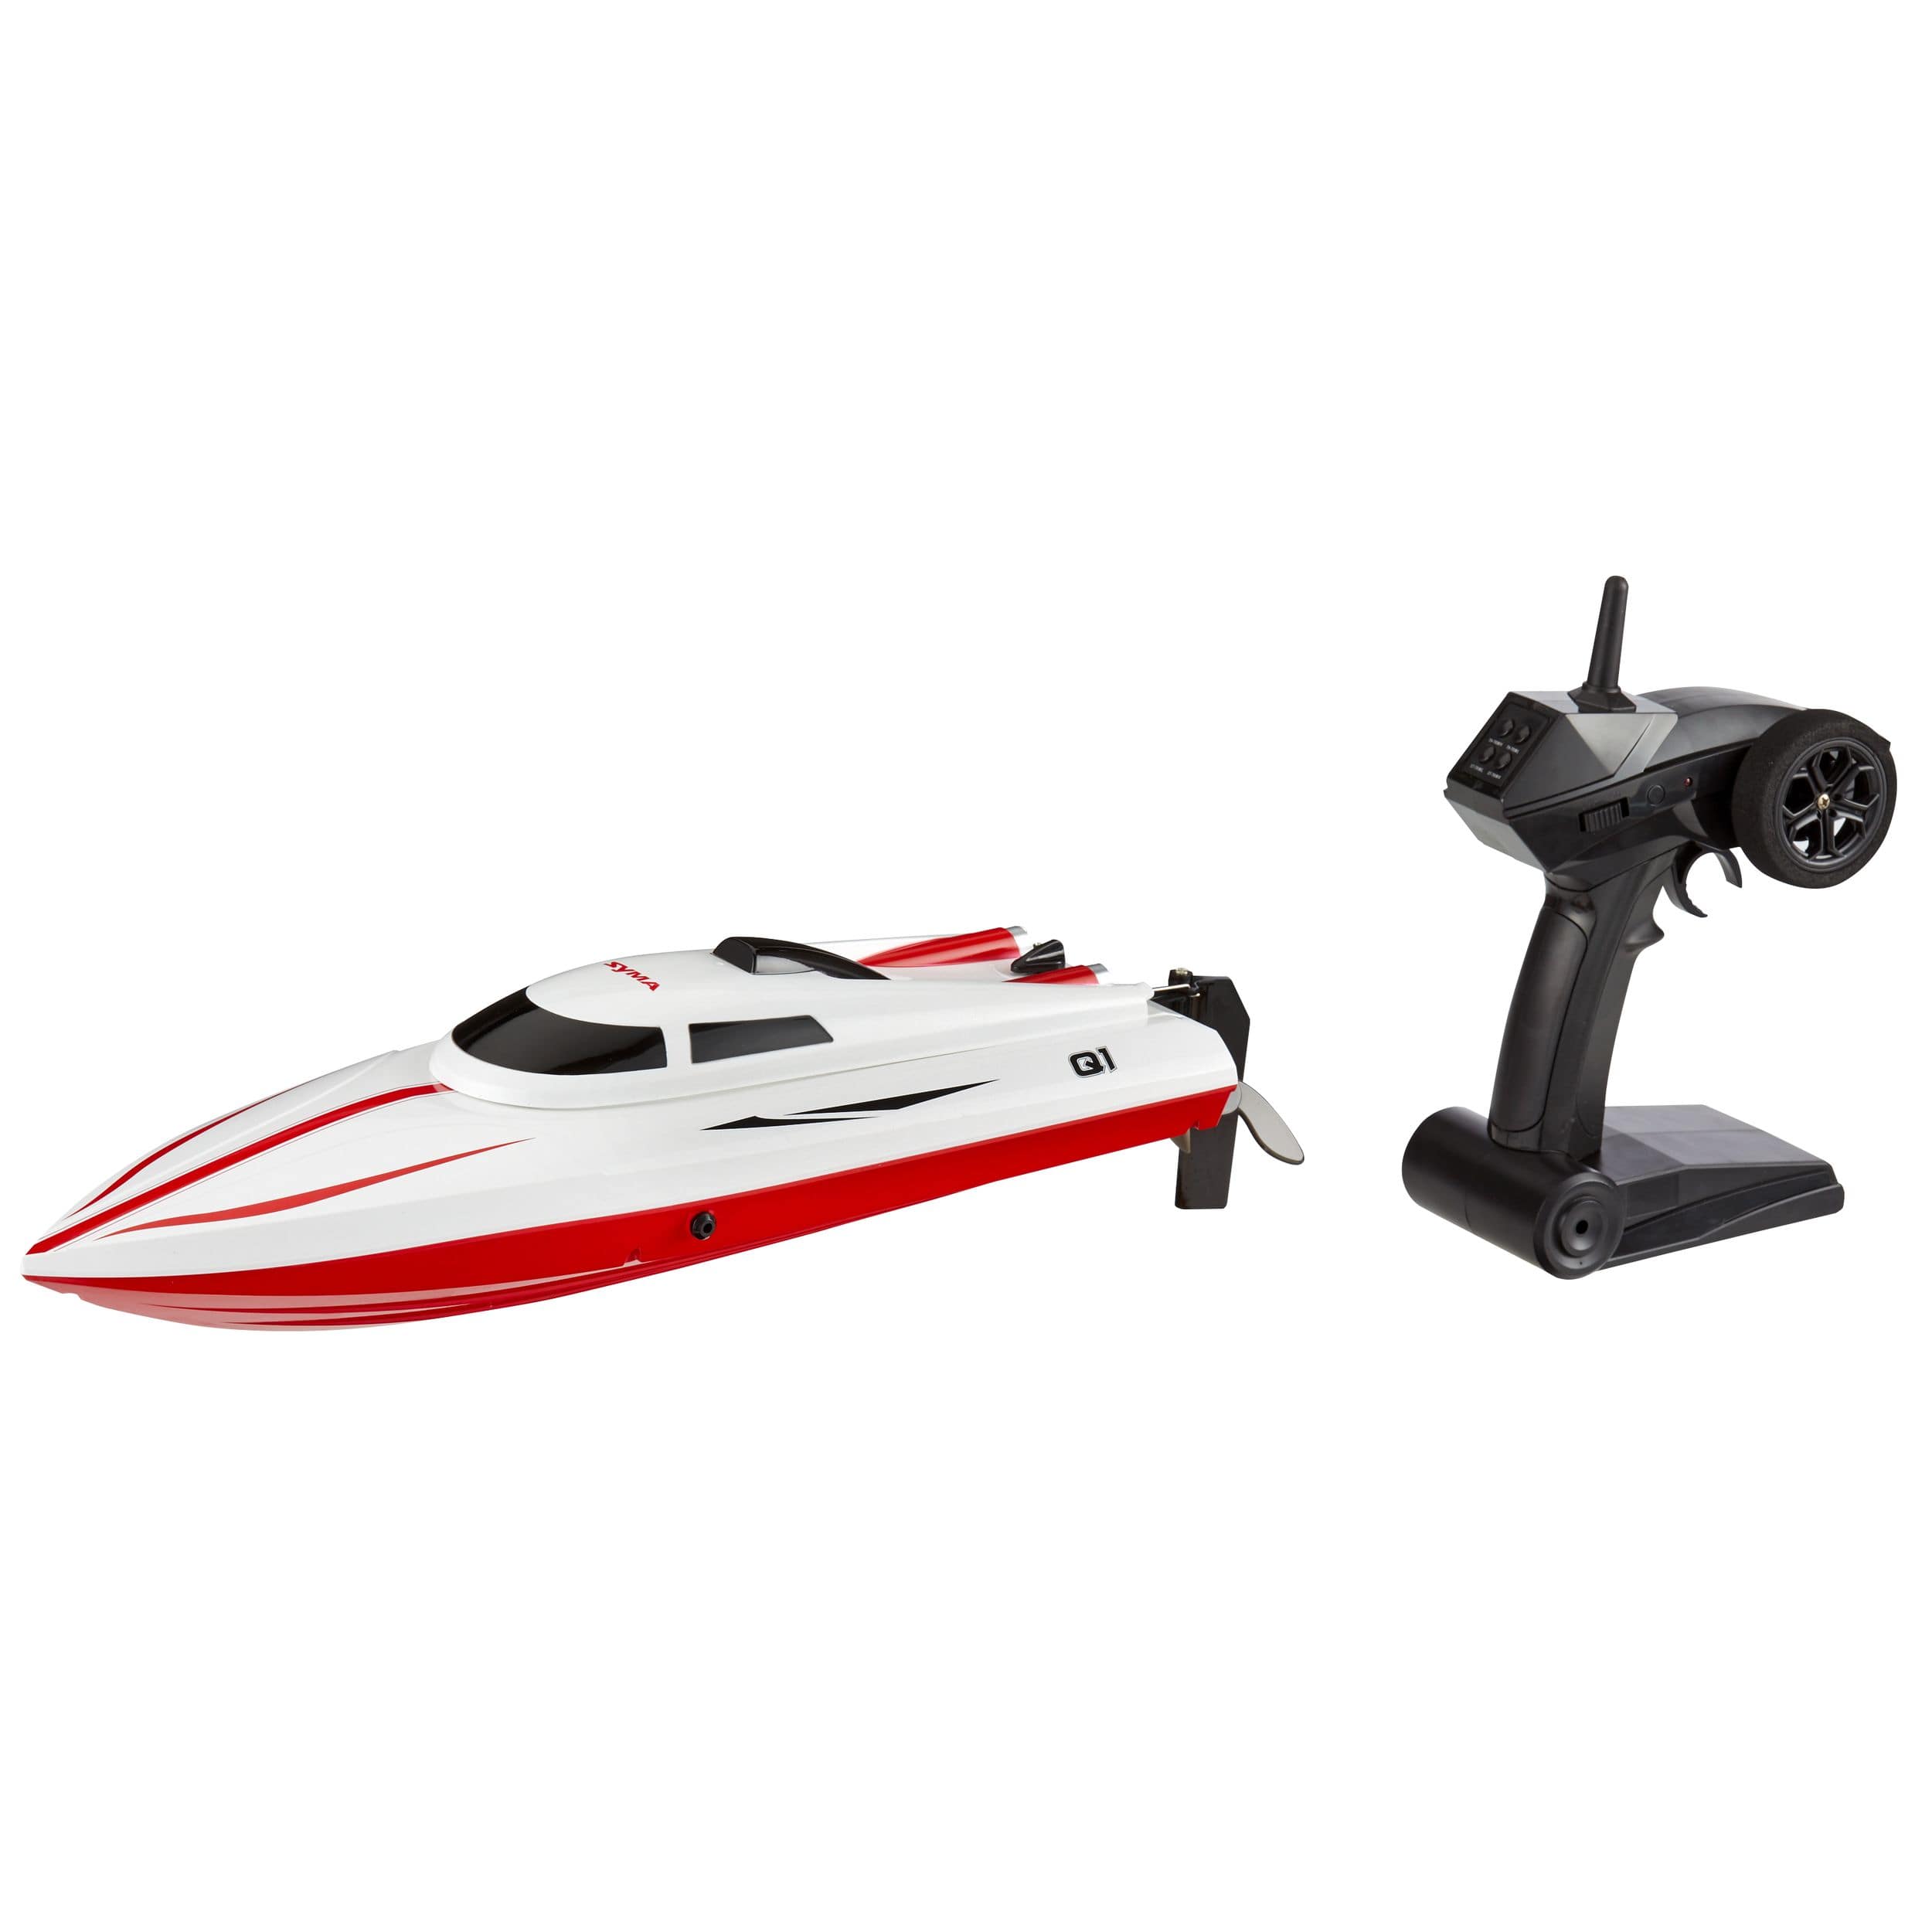 Revolt Q1 Pioneer Remote Controlled Waterproof High Speed Racing Boat Toy,  Ages 12+